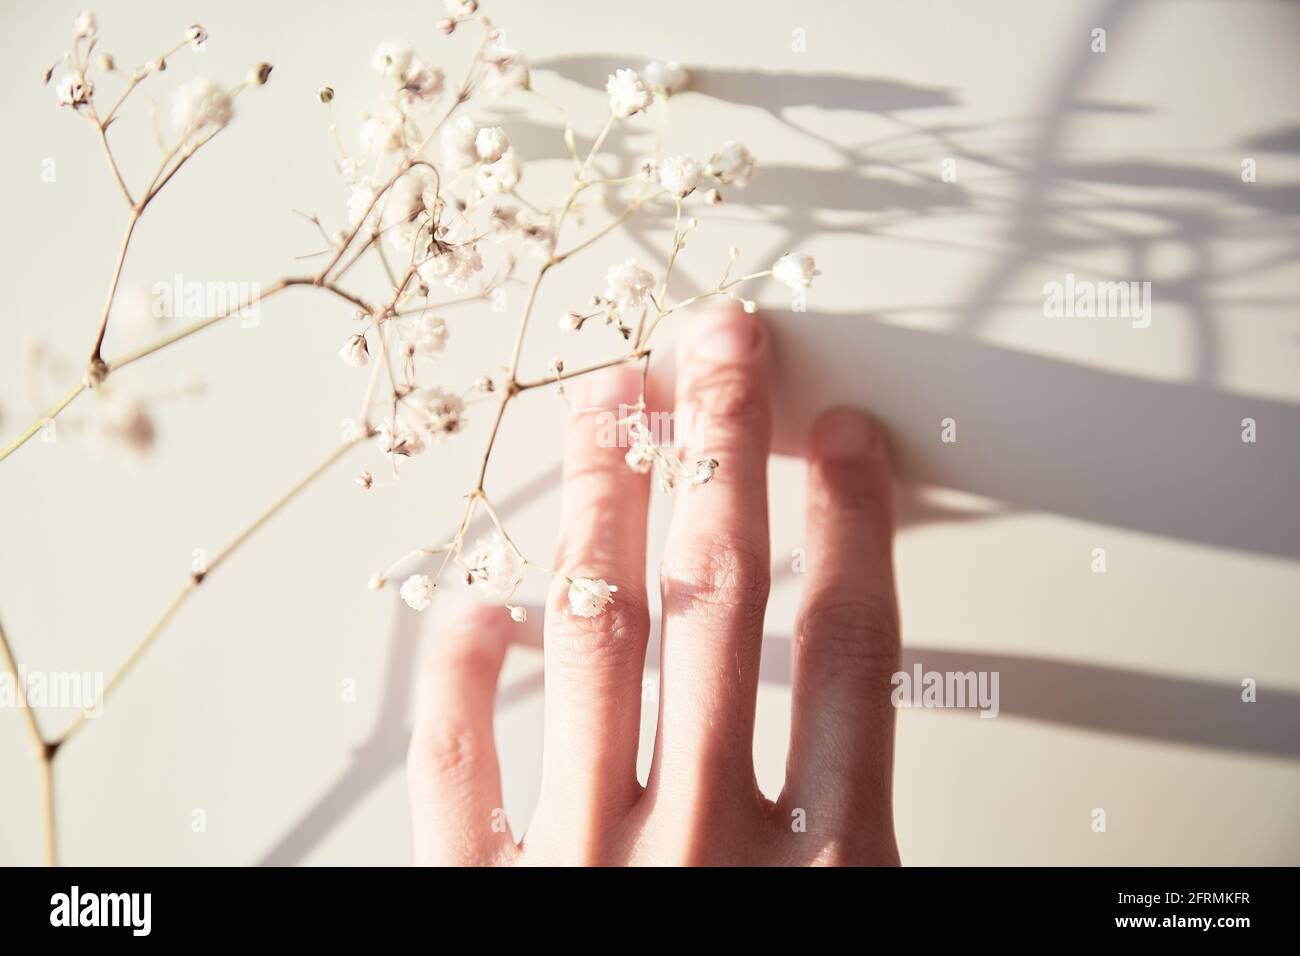 Touching gypsophila flower on the white surface background with shadows. Save the Earth concept. Stock Photo